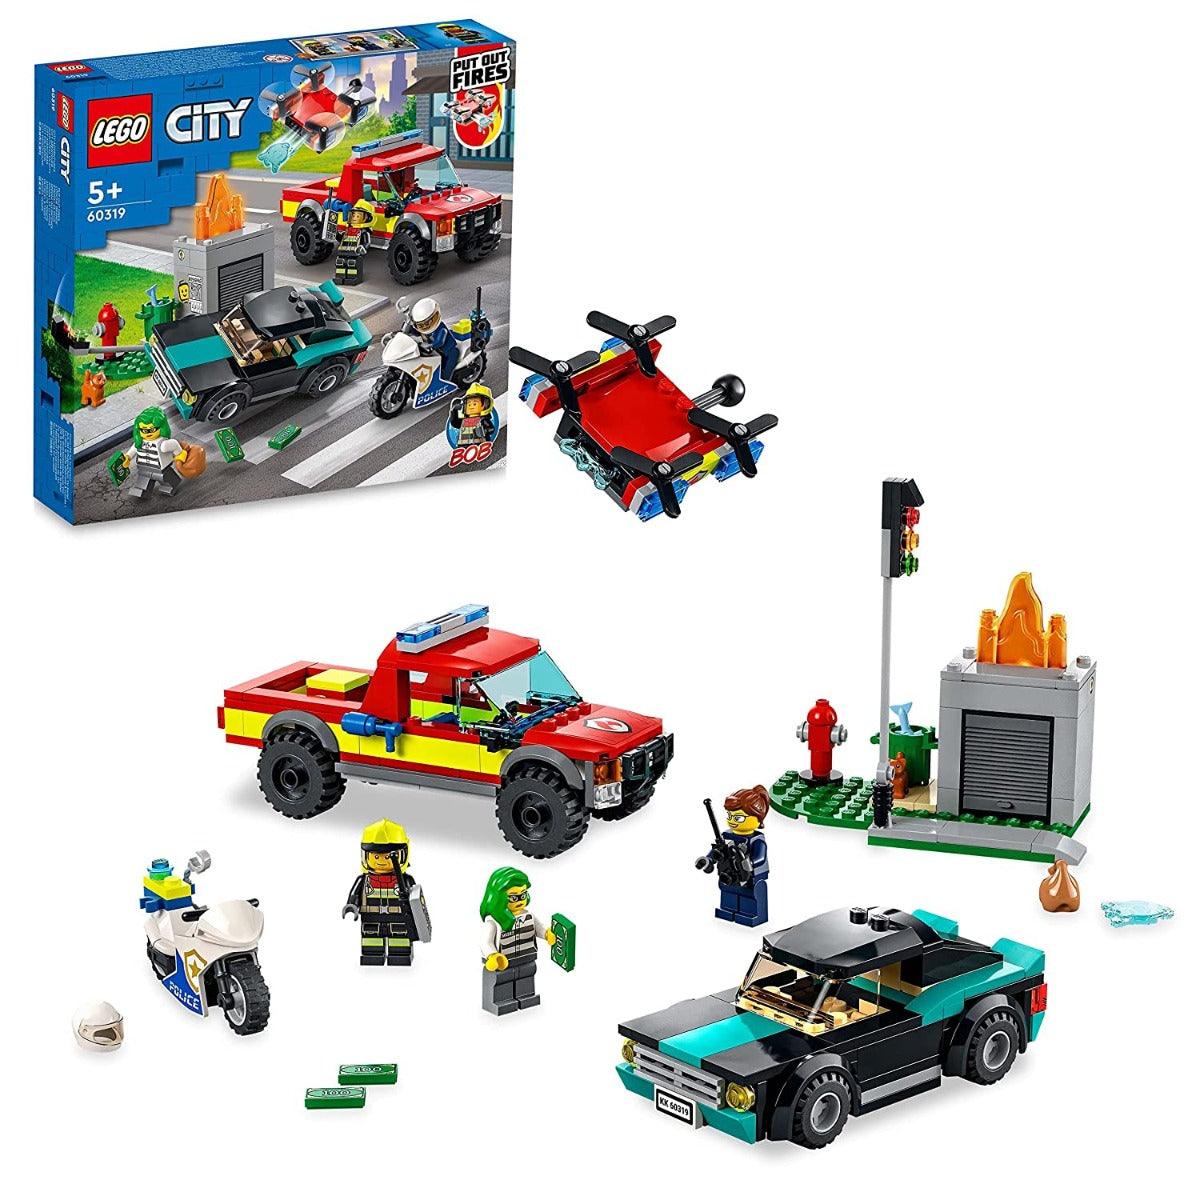 LEGO City Fire Rescue & Police Chase Building Kit for Ages 5+